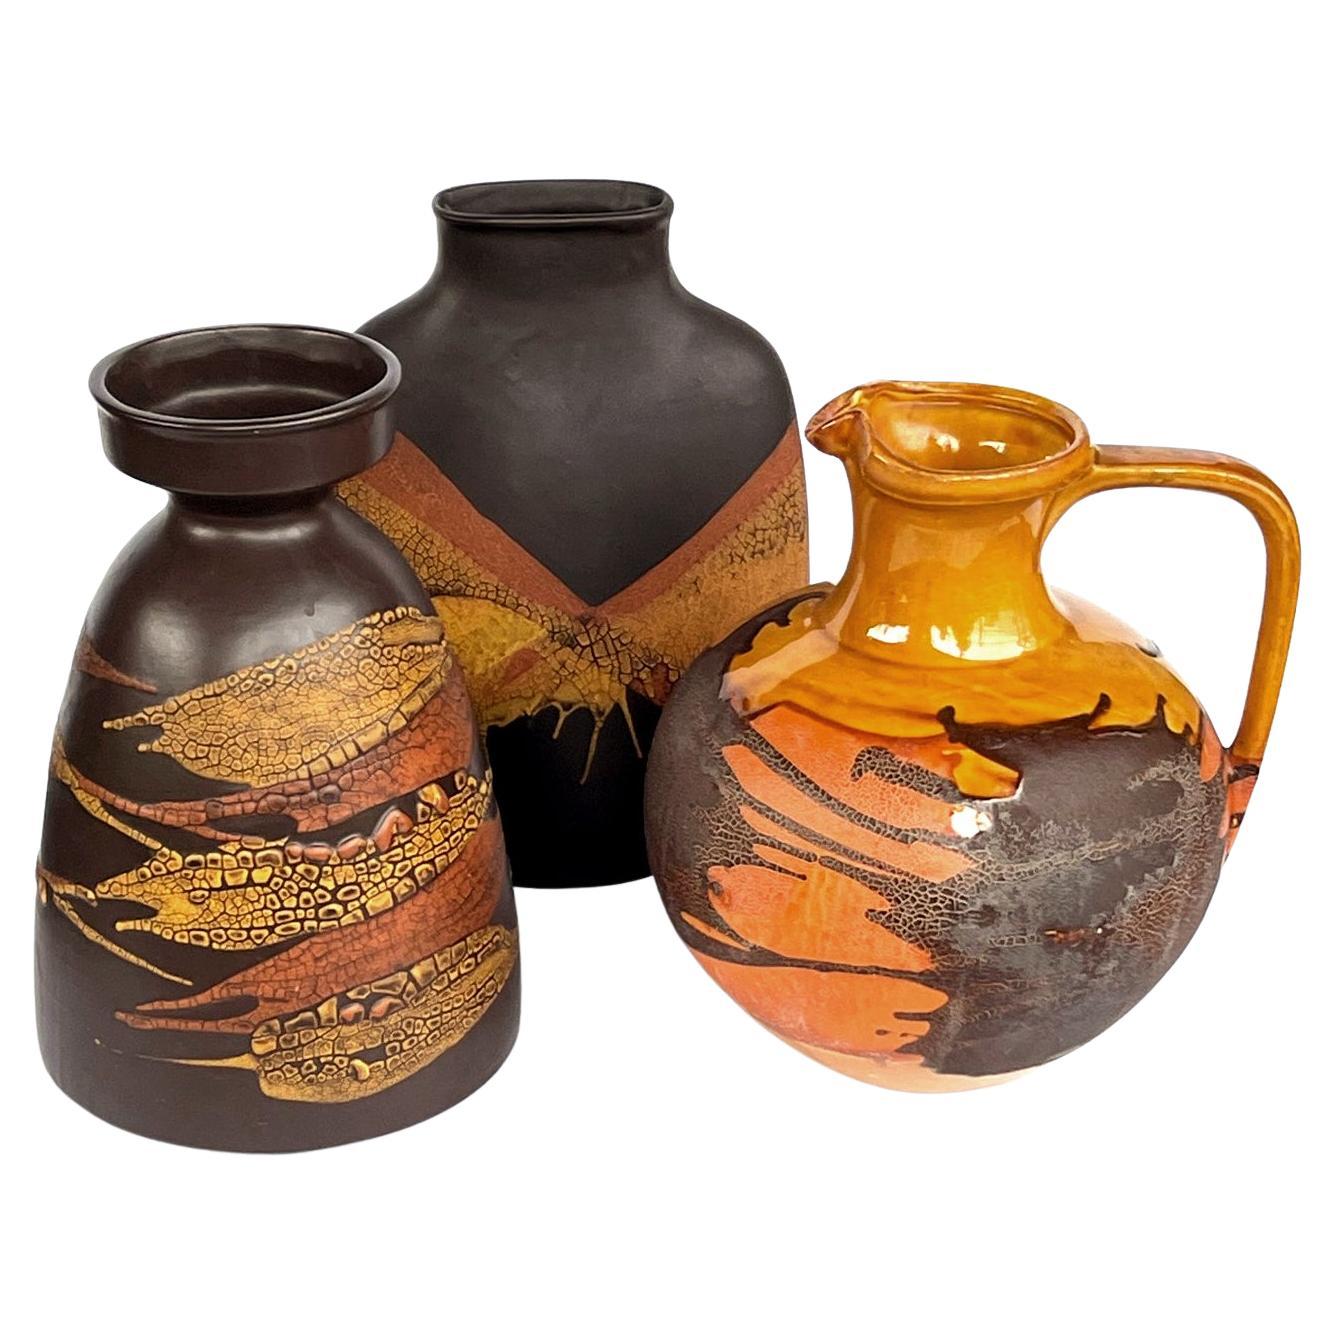 Set of 3 Royal Haeger Pottery Vessels with Brown, Ochre and Orange Glaze